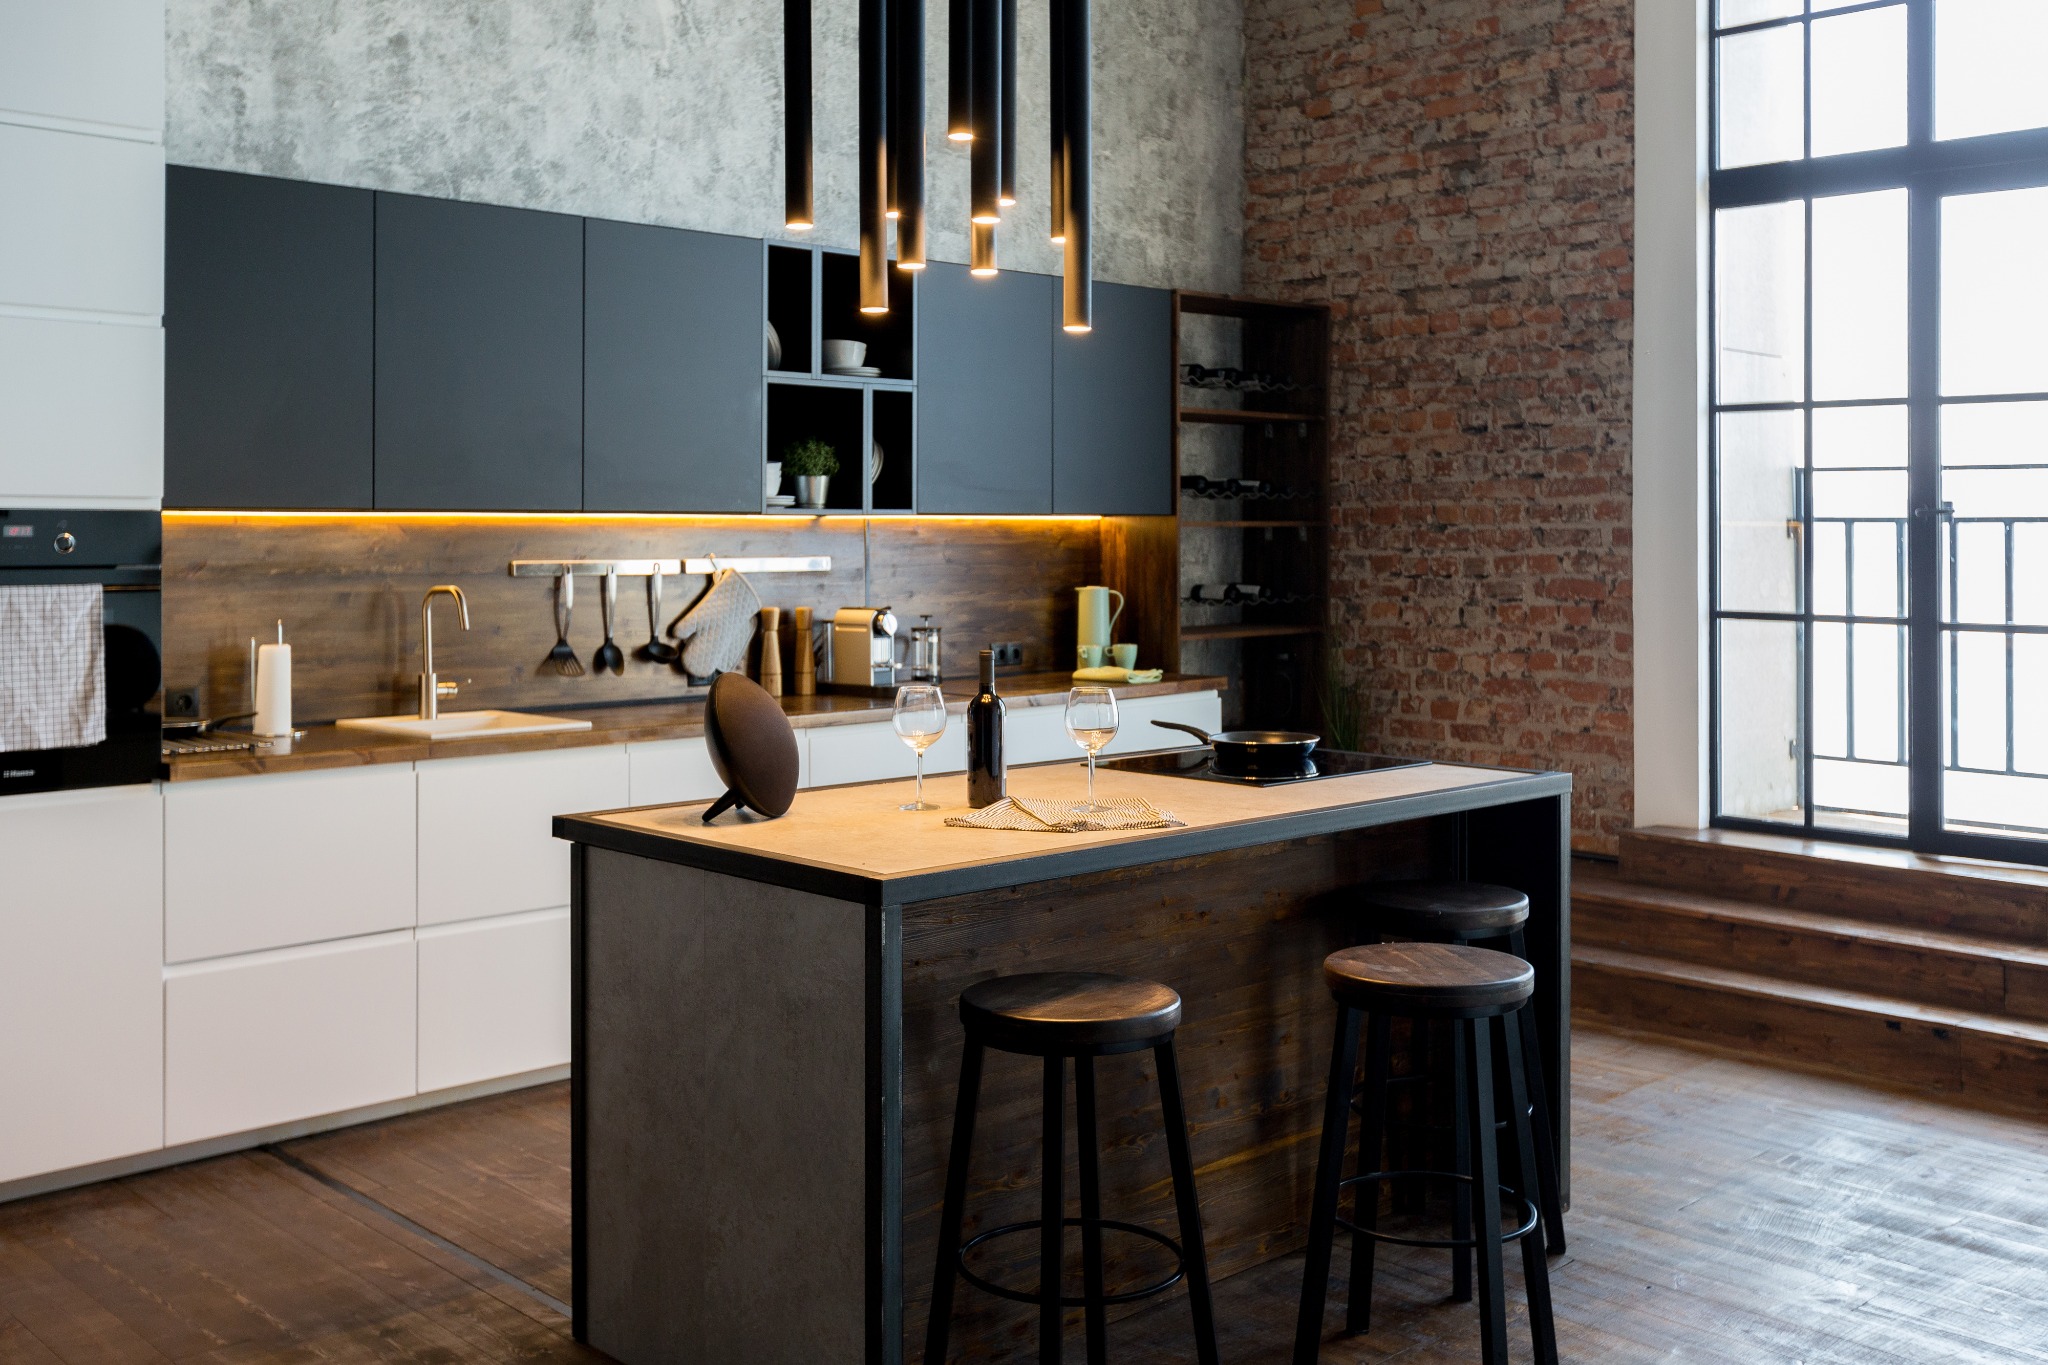 A warm and inviting looking industrial kitchen with built-in cabinets and a kitchen island.